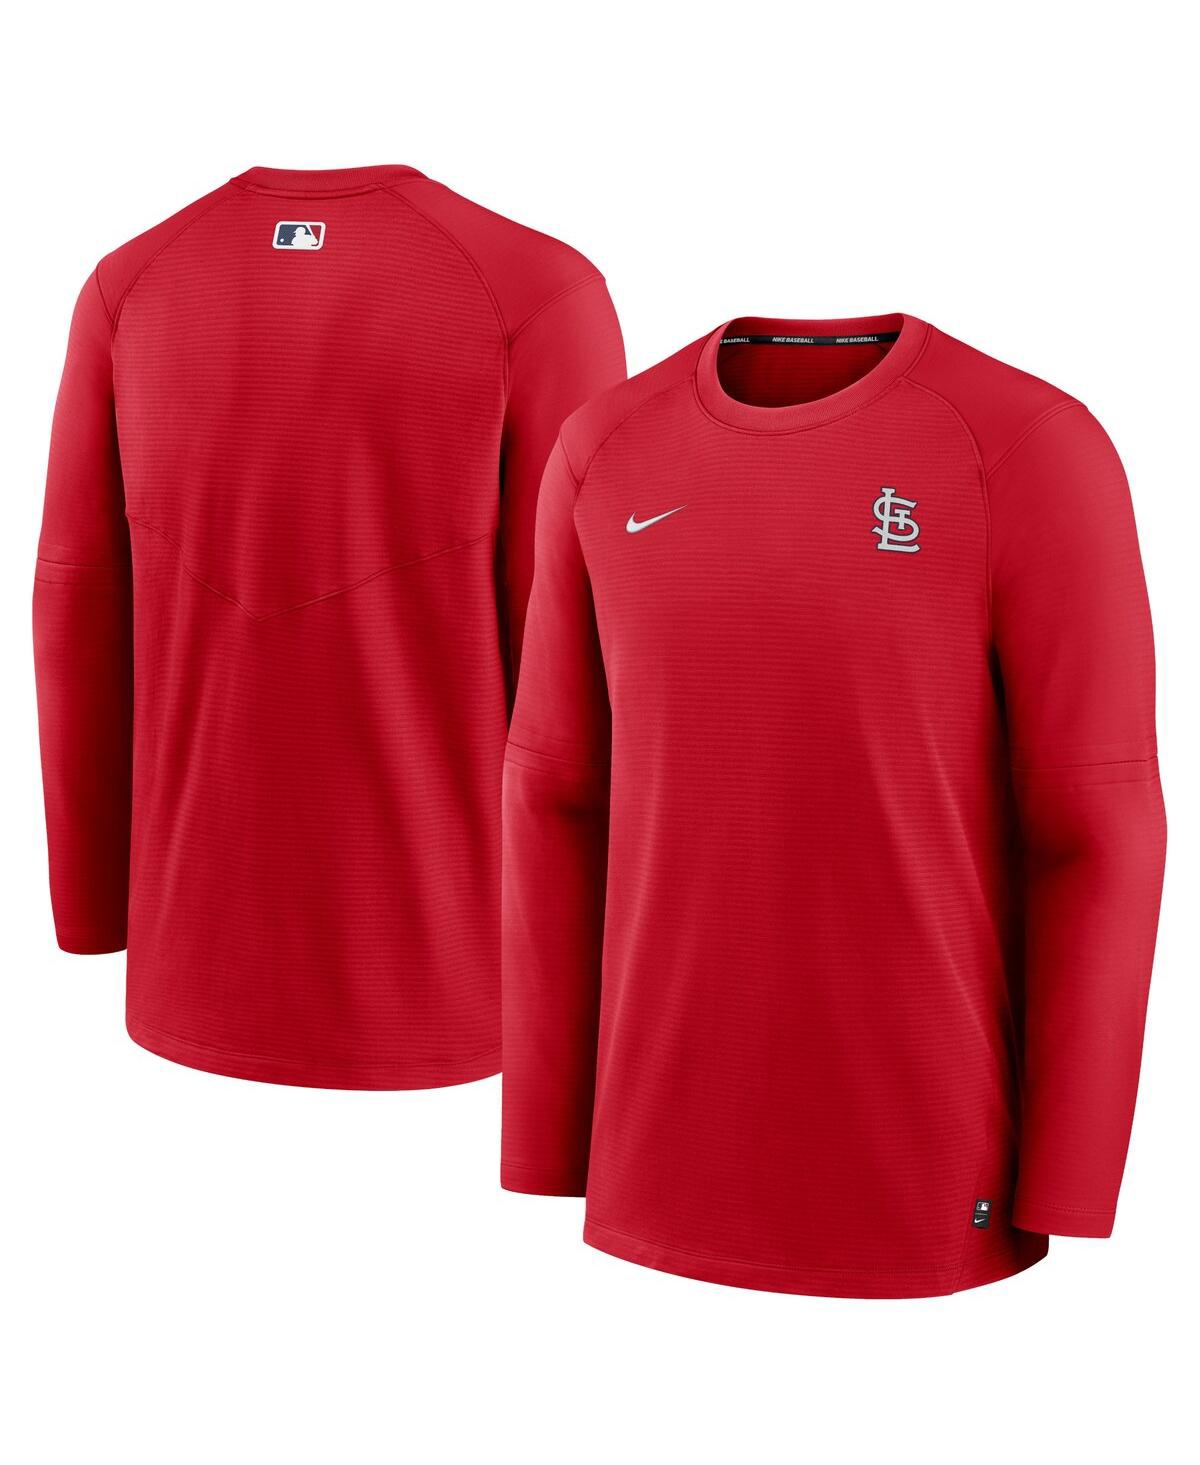 Nike Men's  Red Philadelphia Phillies Authentic Collection Logo Performance Long Sleeve T-shirt